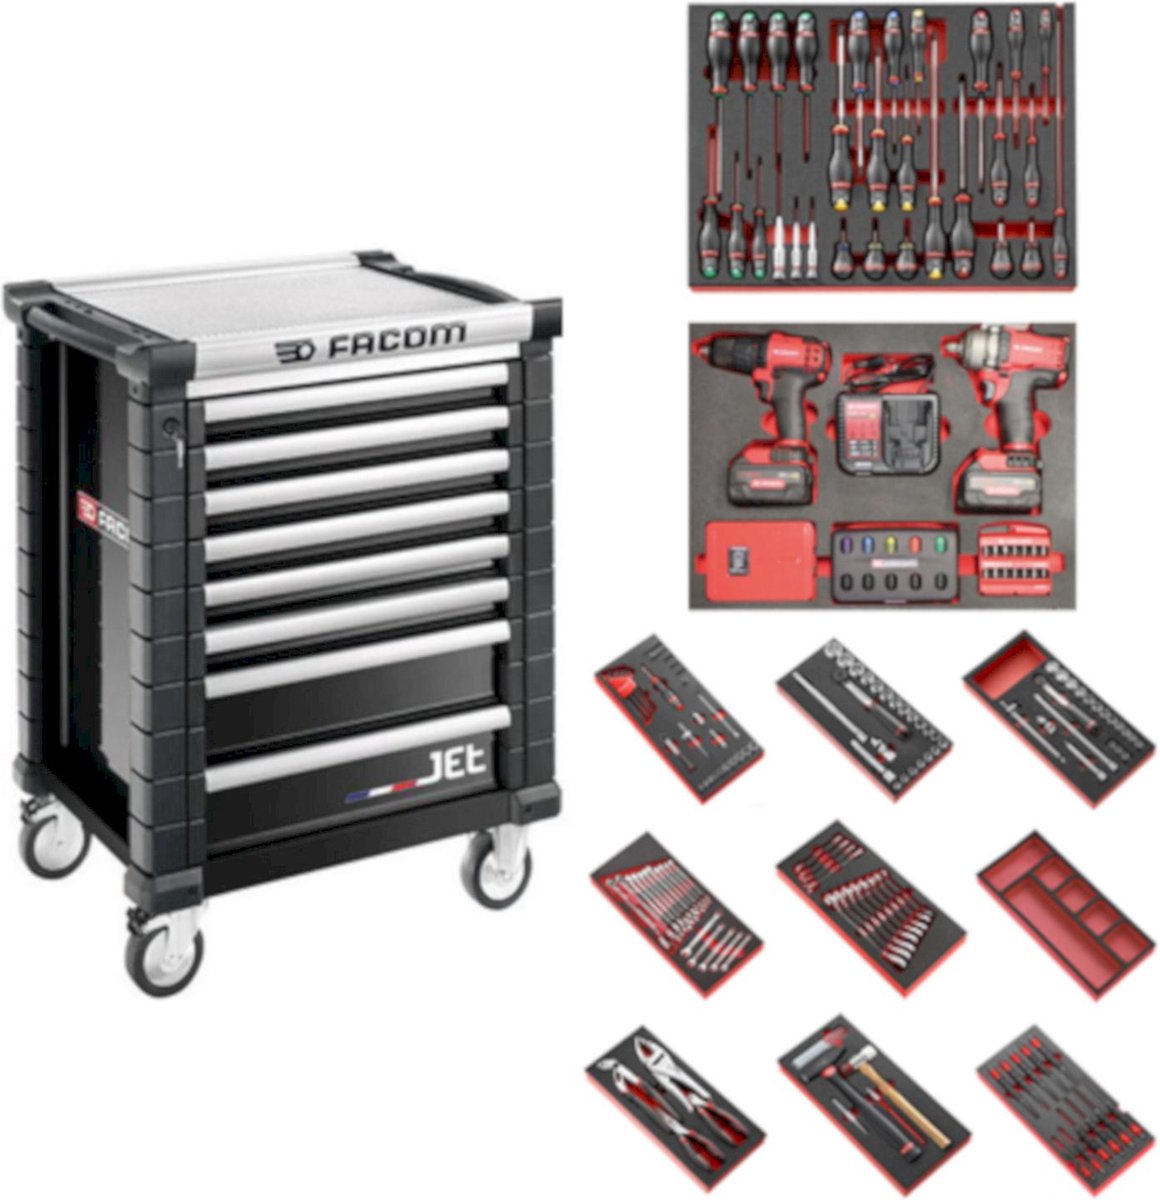 Facom EDITION SPECIALE My JET Tool trolley 8 tiroirs - 5 tiroirs remplis !  